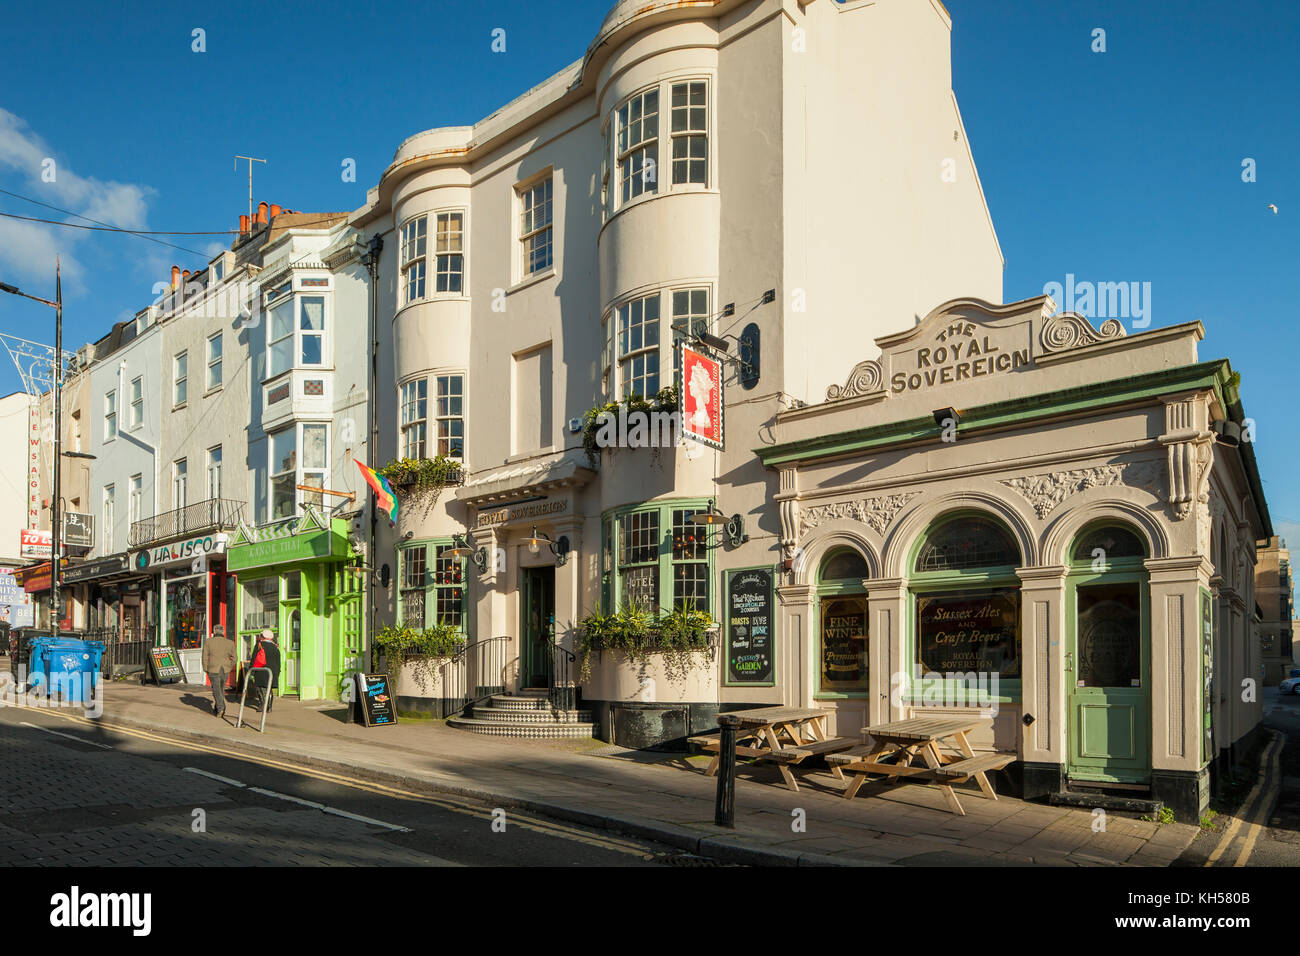 Herbstnachmittag in Brighton City Centre, East Sussex, England. Stockfoto